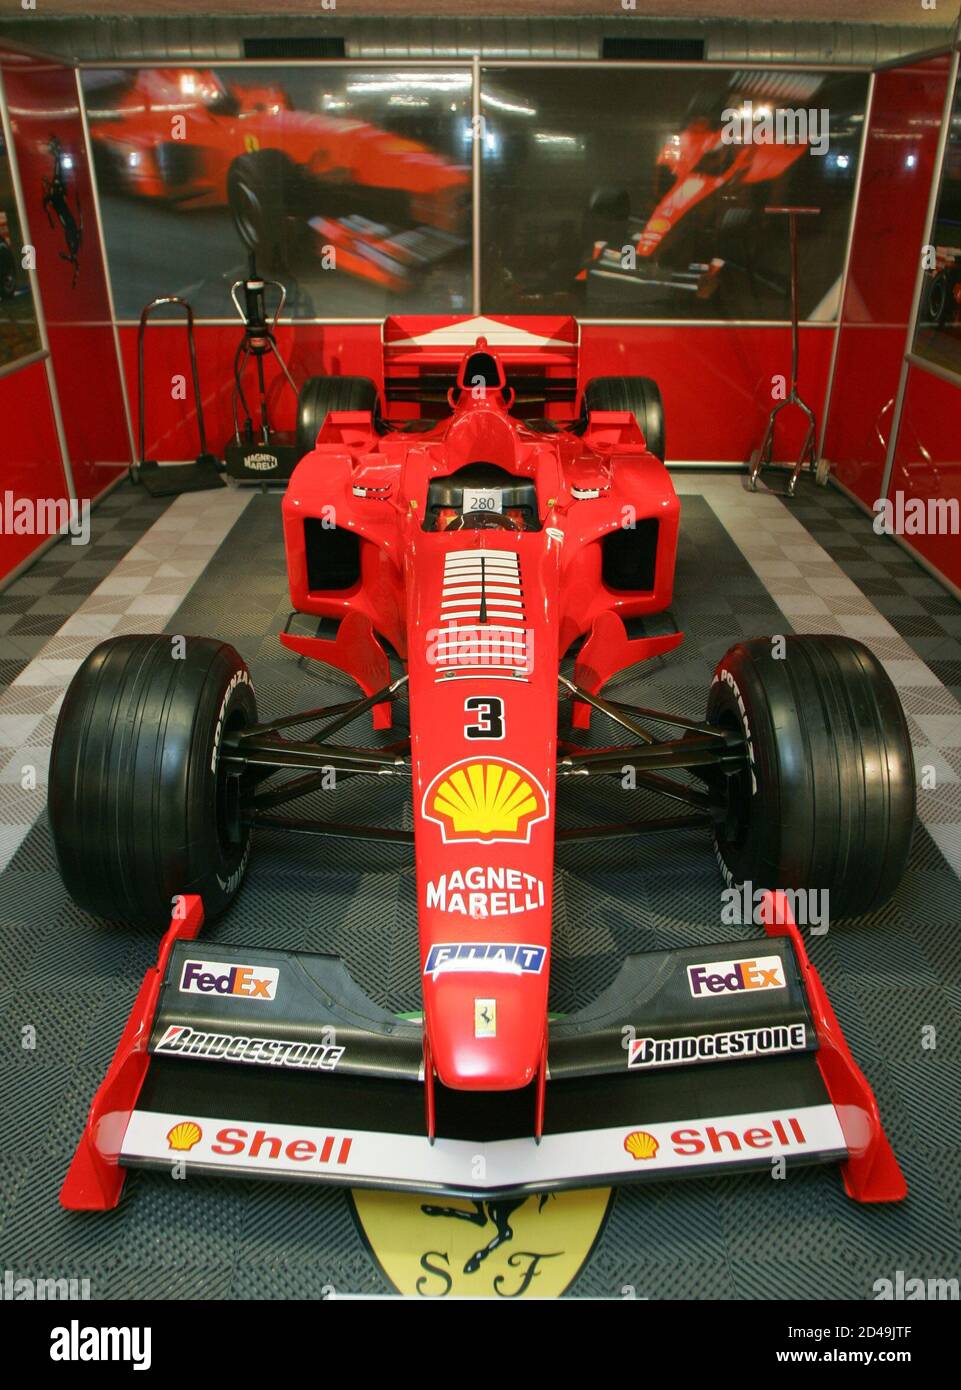 A 1999 Ferrari F399 F1 that was driven by World champion Michael Schumacher  to be auctioned in Gstaad. The 1999 Ferrari F399 F1, a racing single seater  that was driven by World